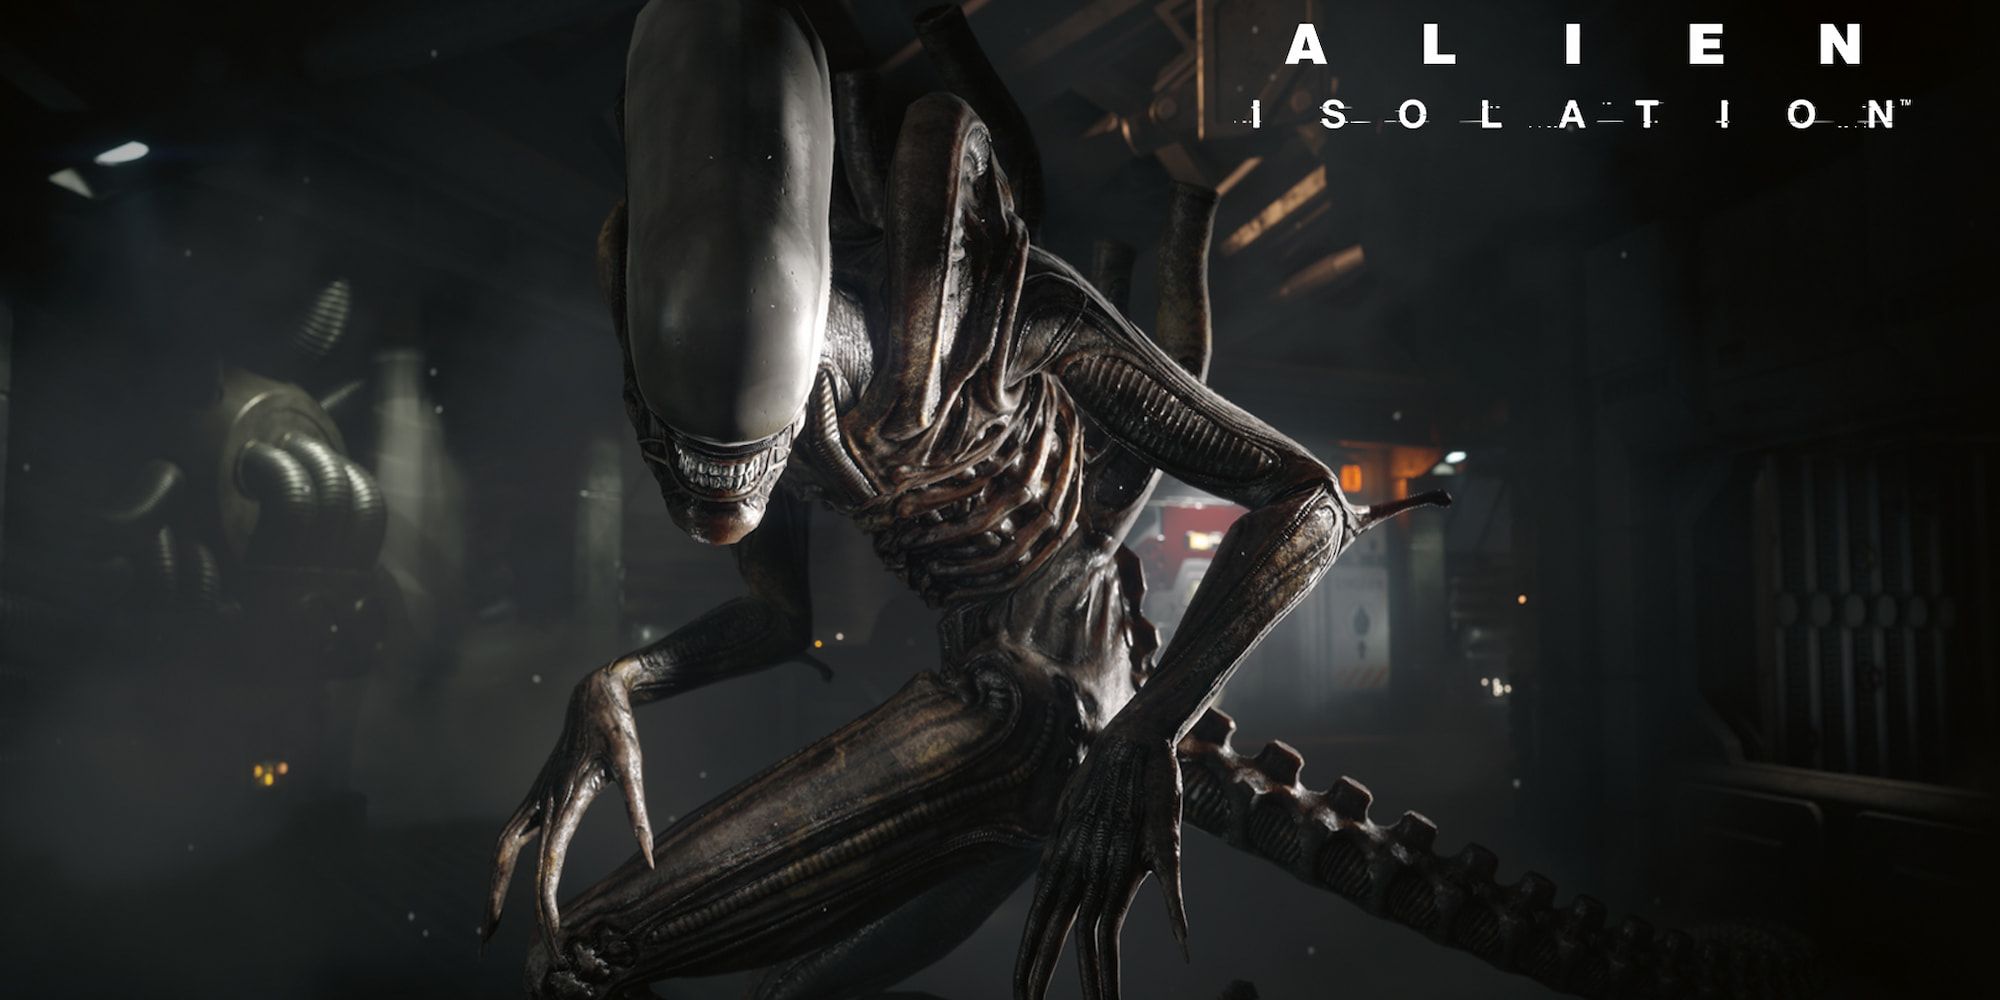 Xenomorph from Alien: Isolation staring into the camera.